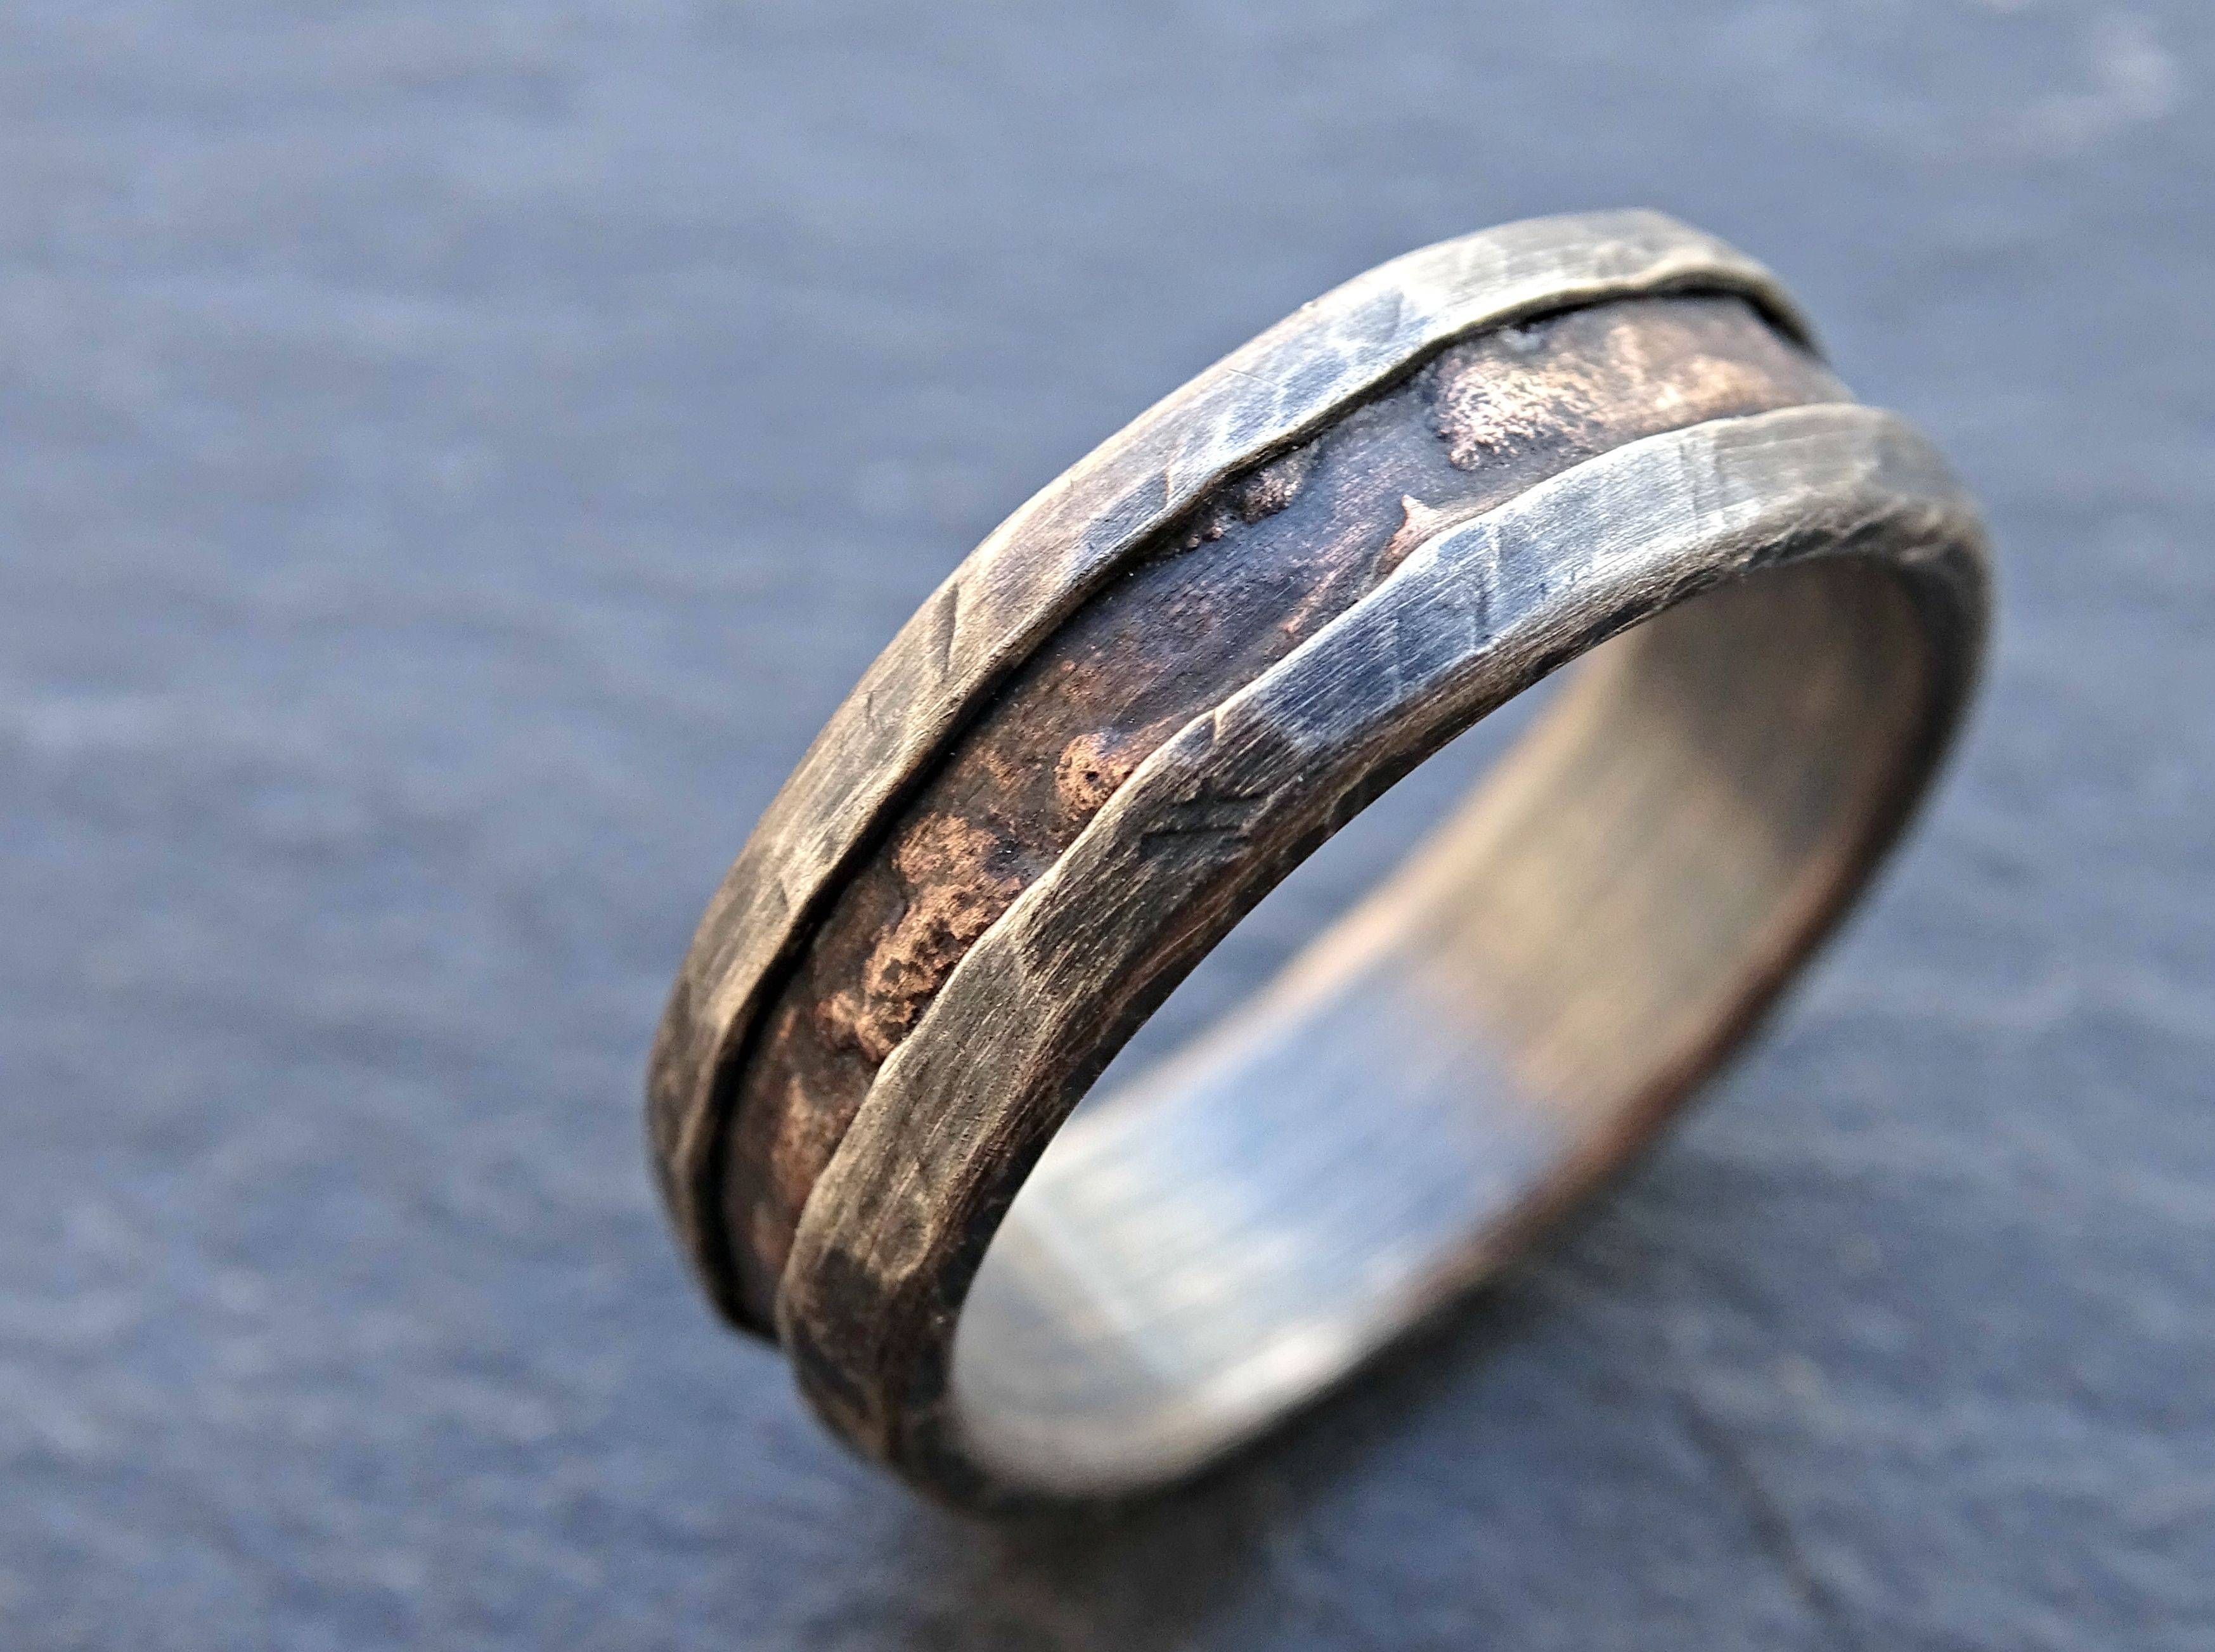 Buy A Hand Made Cool Mens Ring, Alternative Wedding Band Rugged Regarding Most Recently Released Trendy Mens Wedding Bands (View 11 of 15)